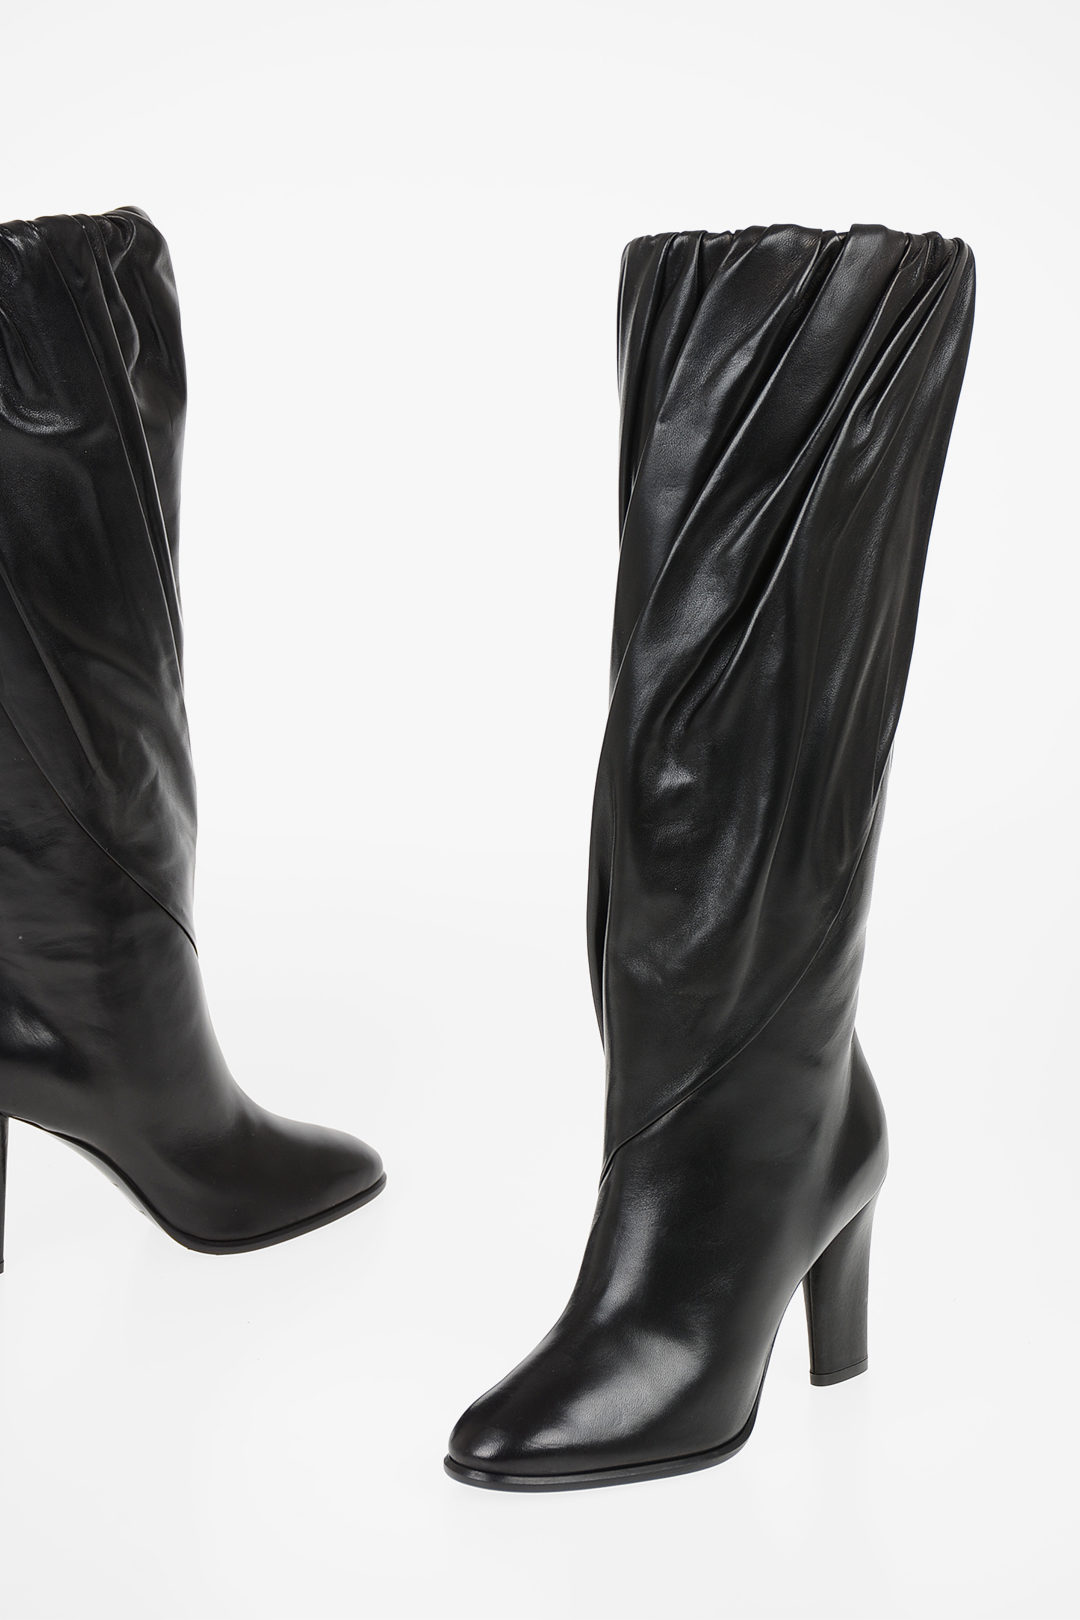 givenchy high boots